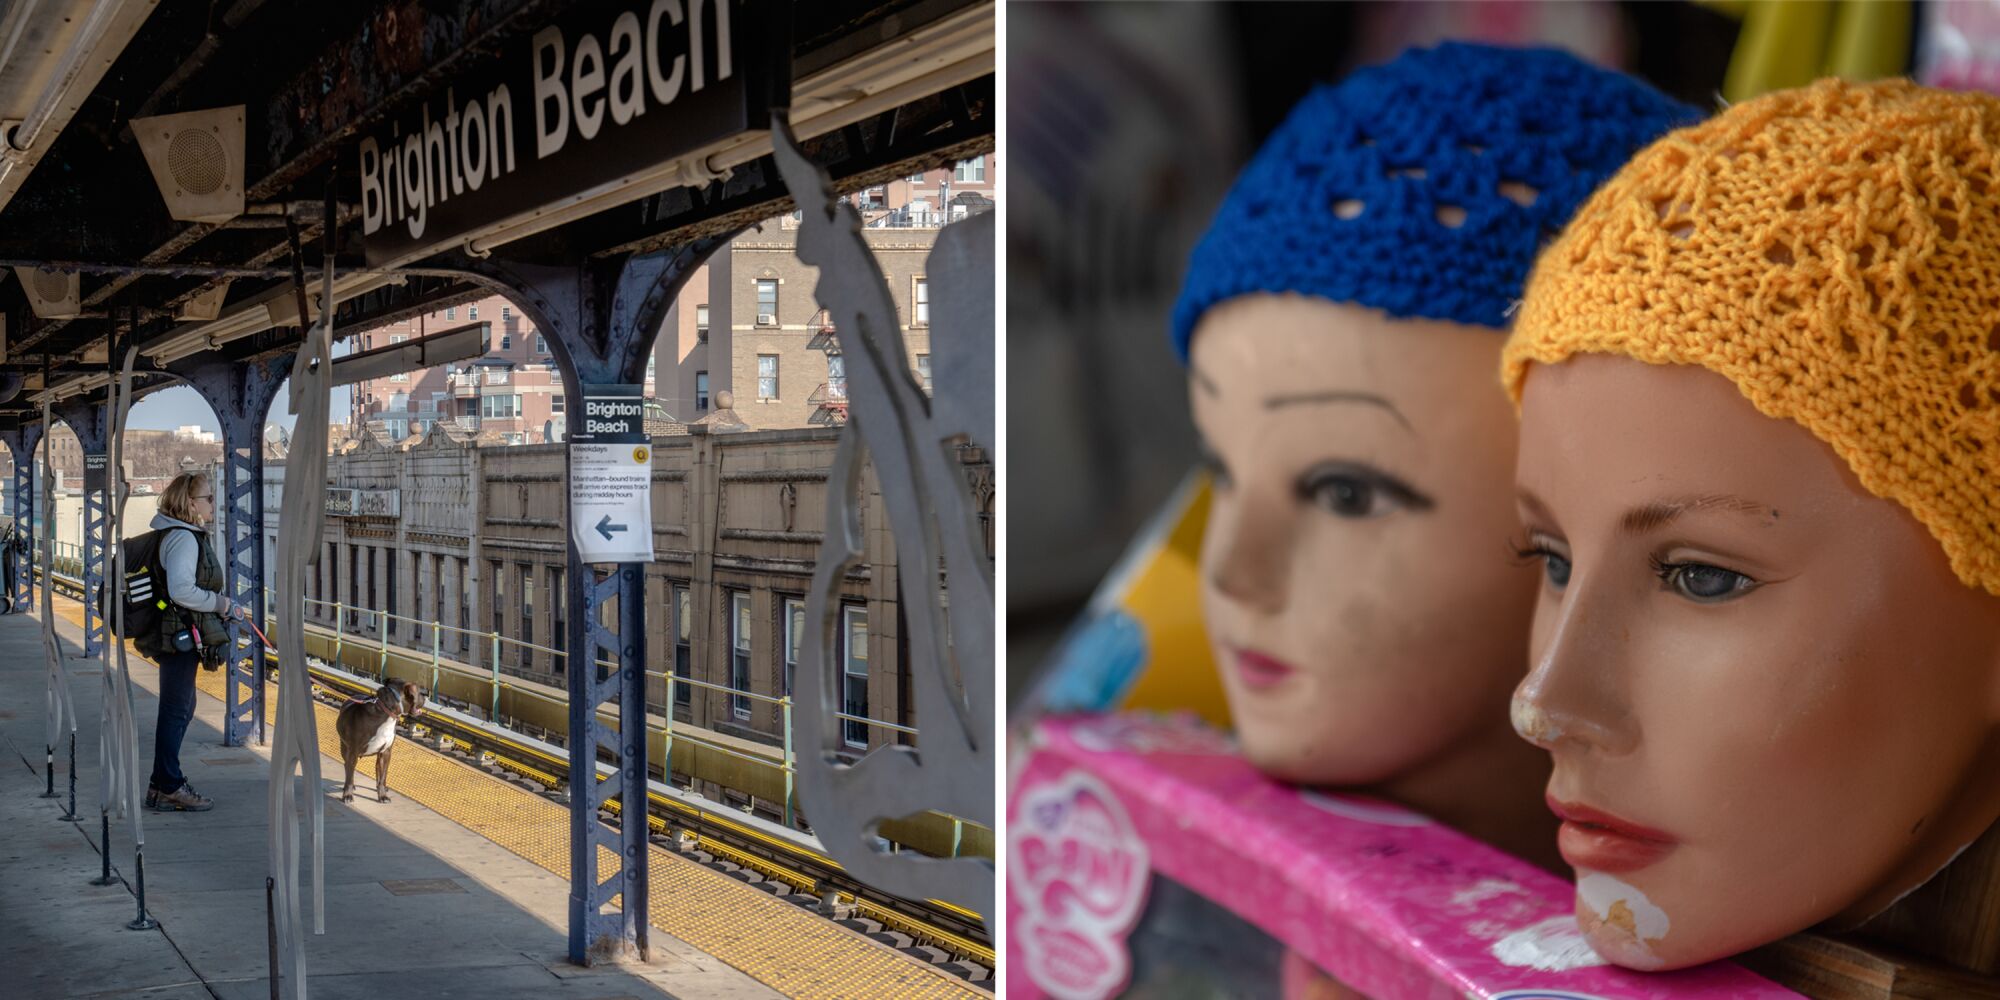 Left: Brighton Beach train station. Right: Head coverings in the colors of the Ukrainian flag sit on mannequins.